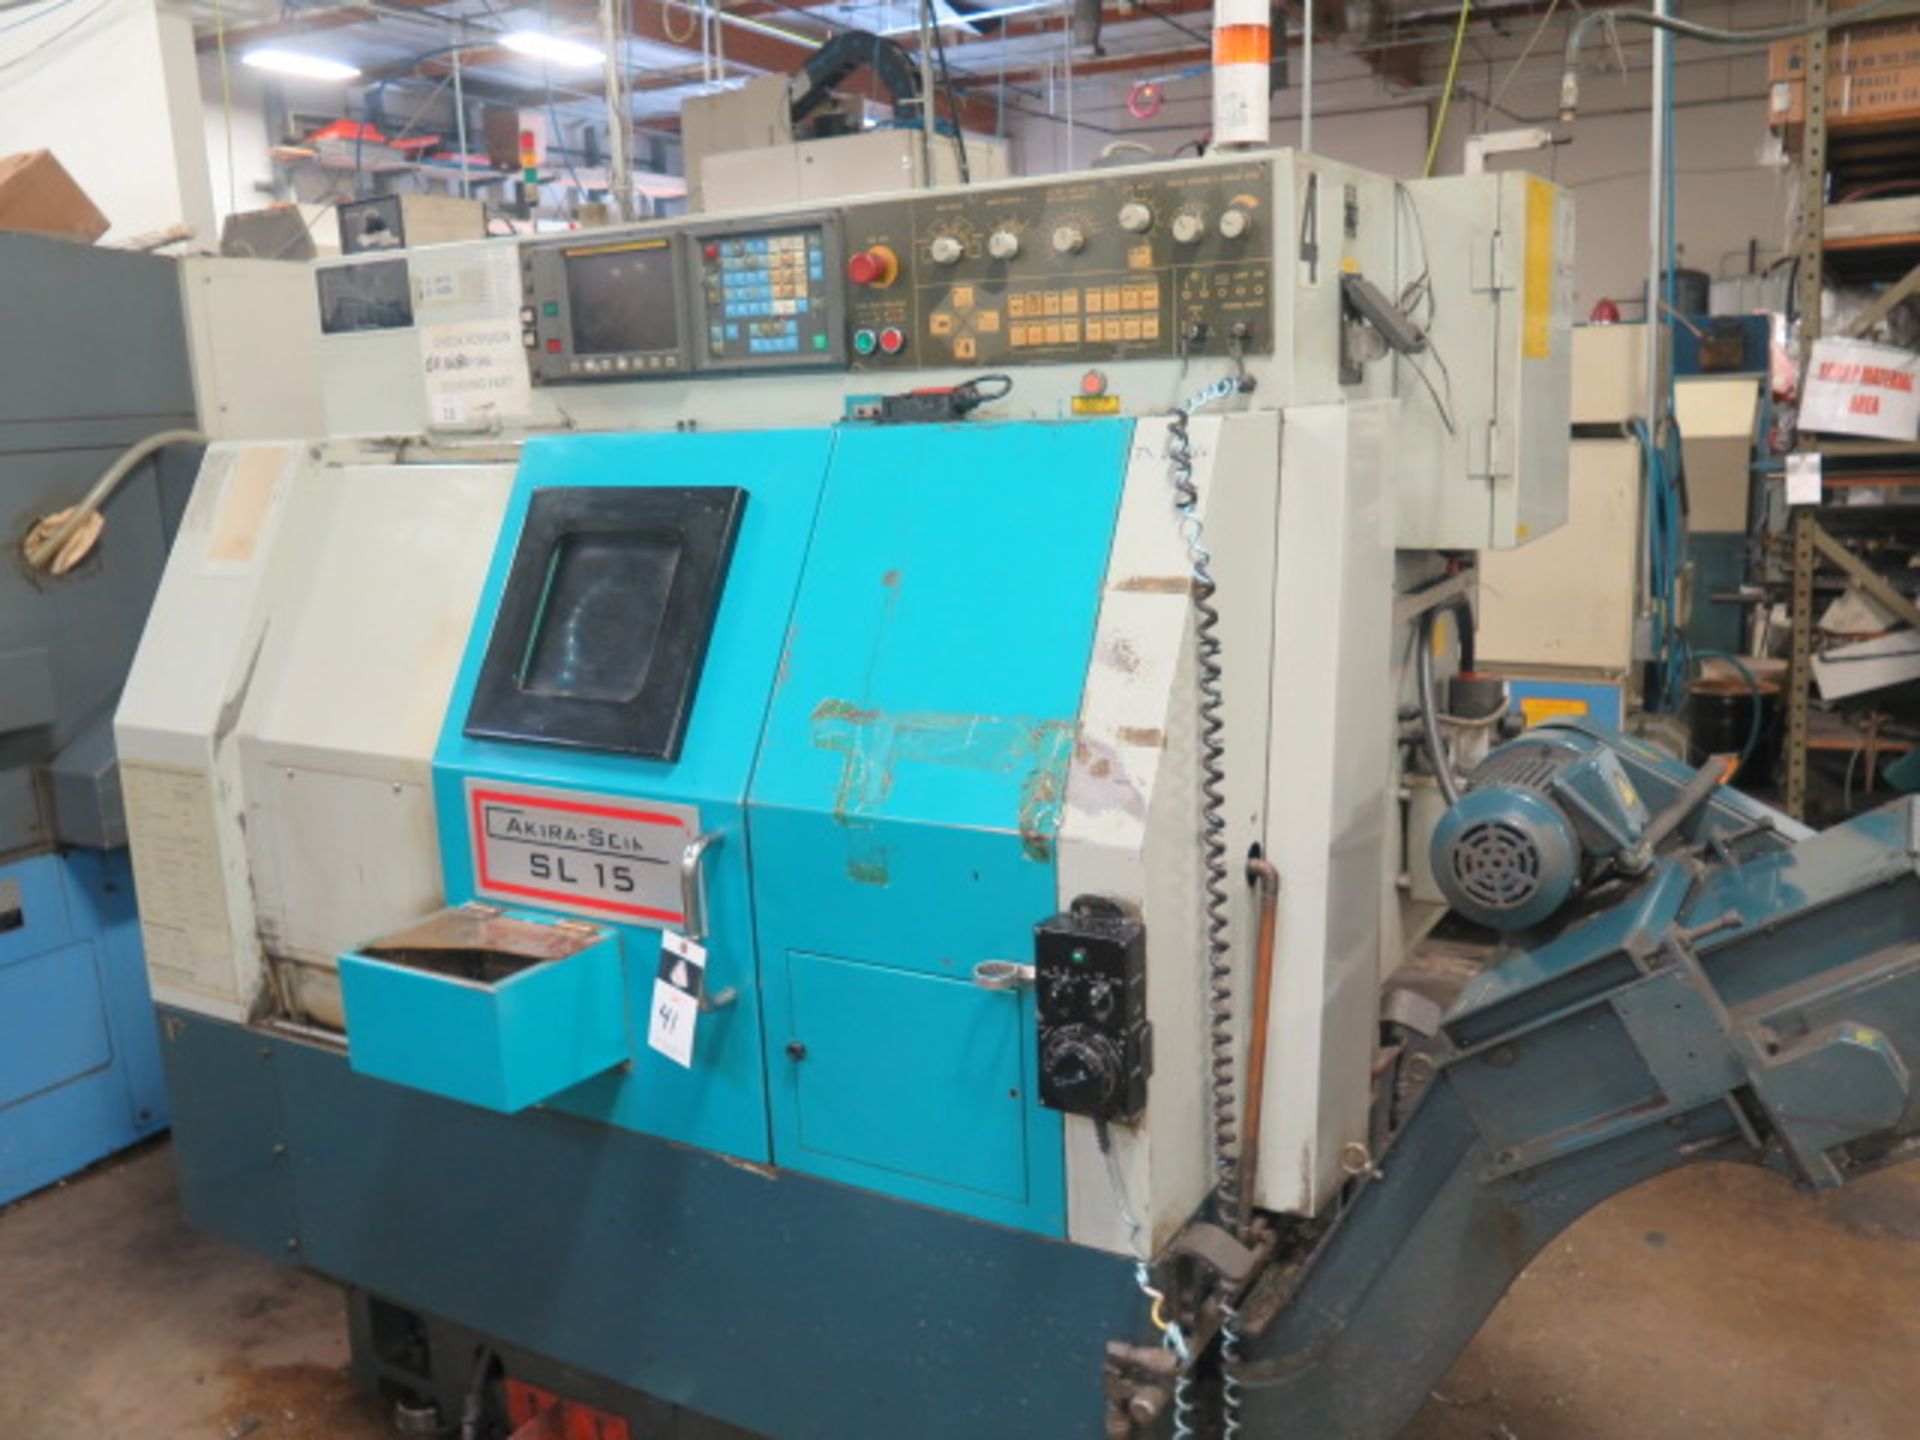 2001 Akira Seiki SL-15 CNC Turning Center s/n 01TC132-126 w/ Fanuc Series 0-T Controls, SOLD AS IS - Image 3 of 13